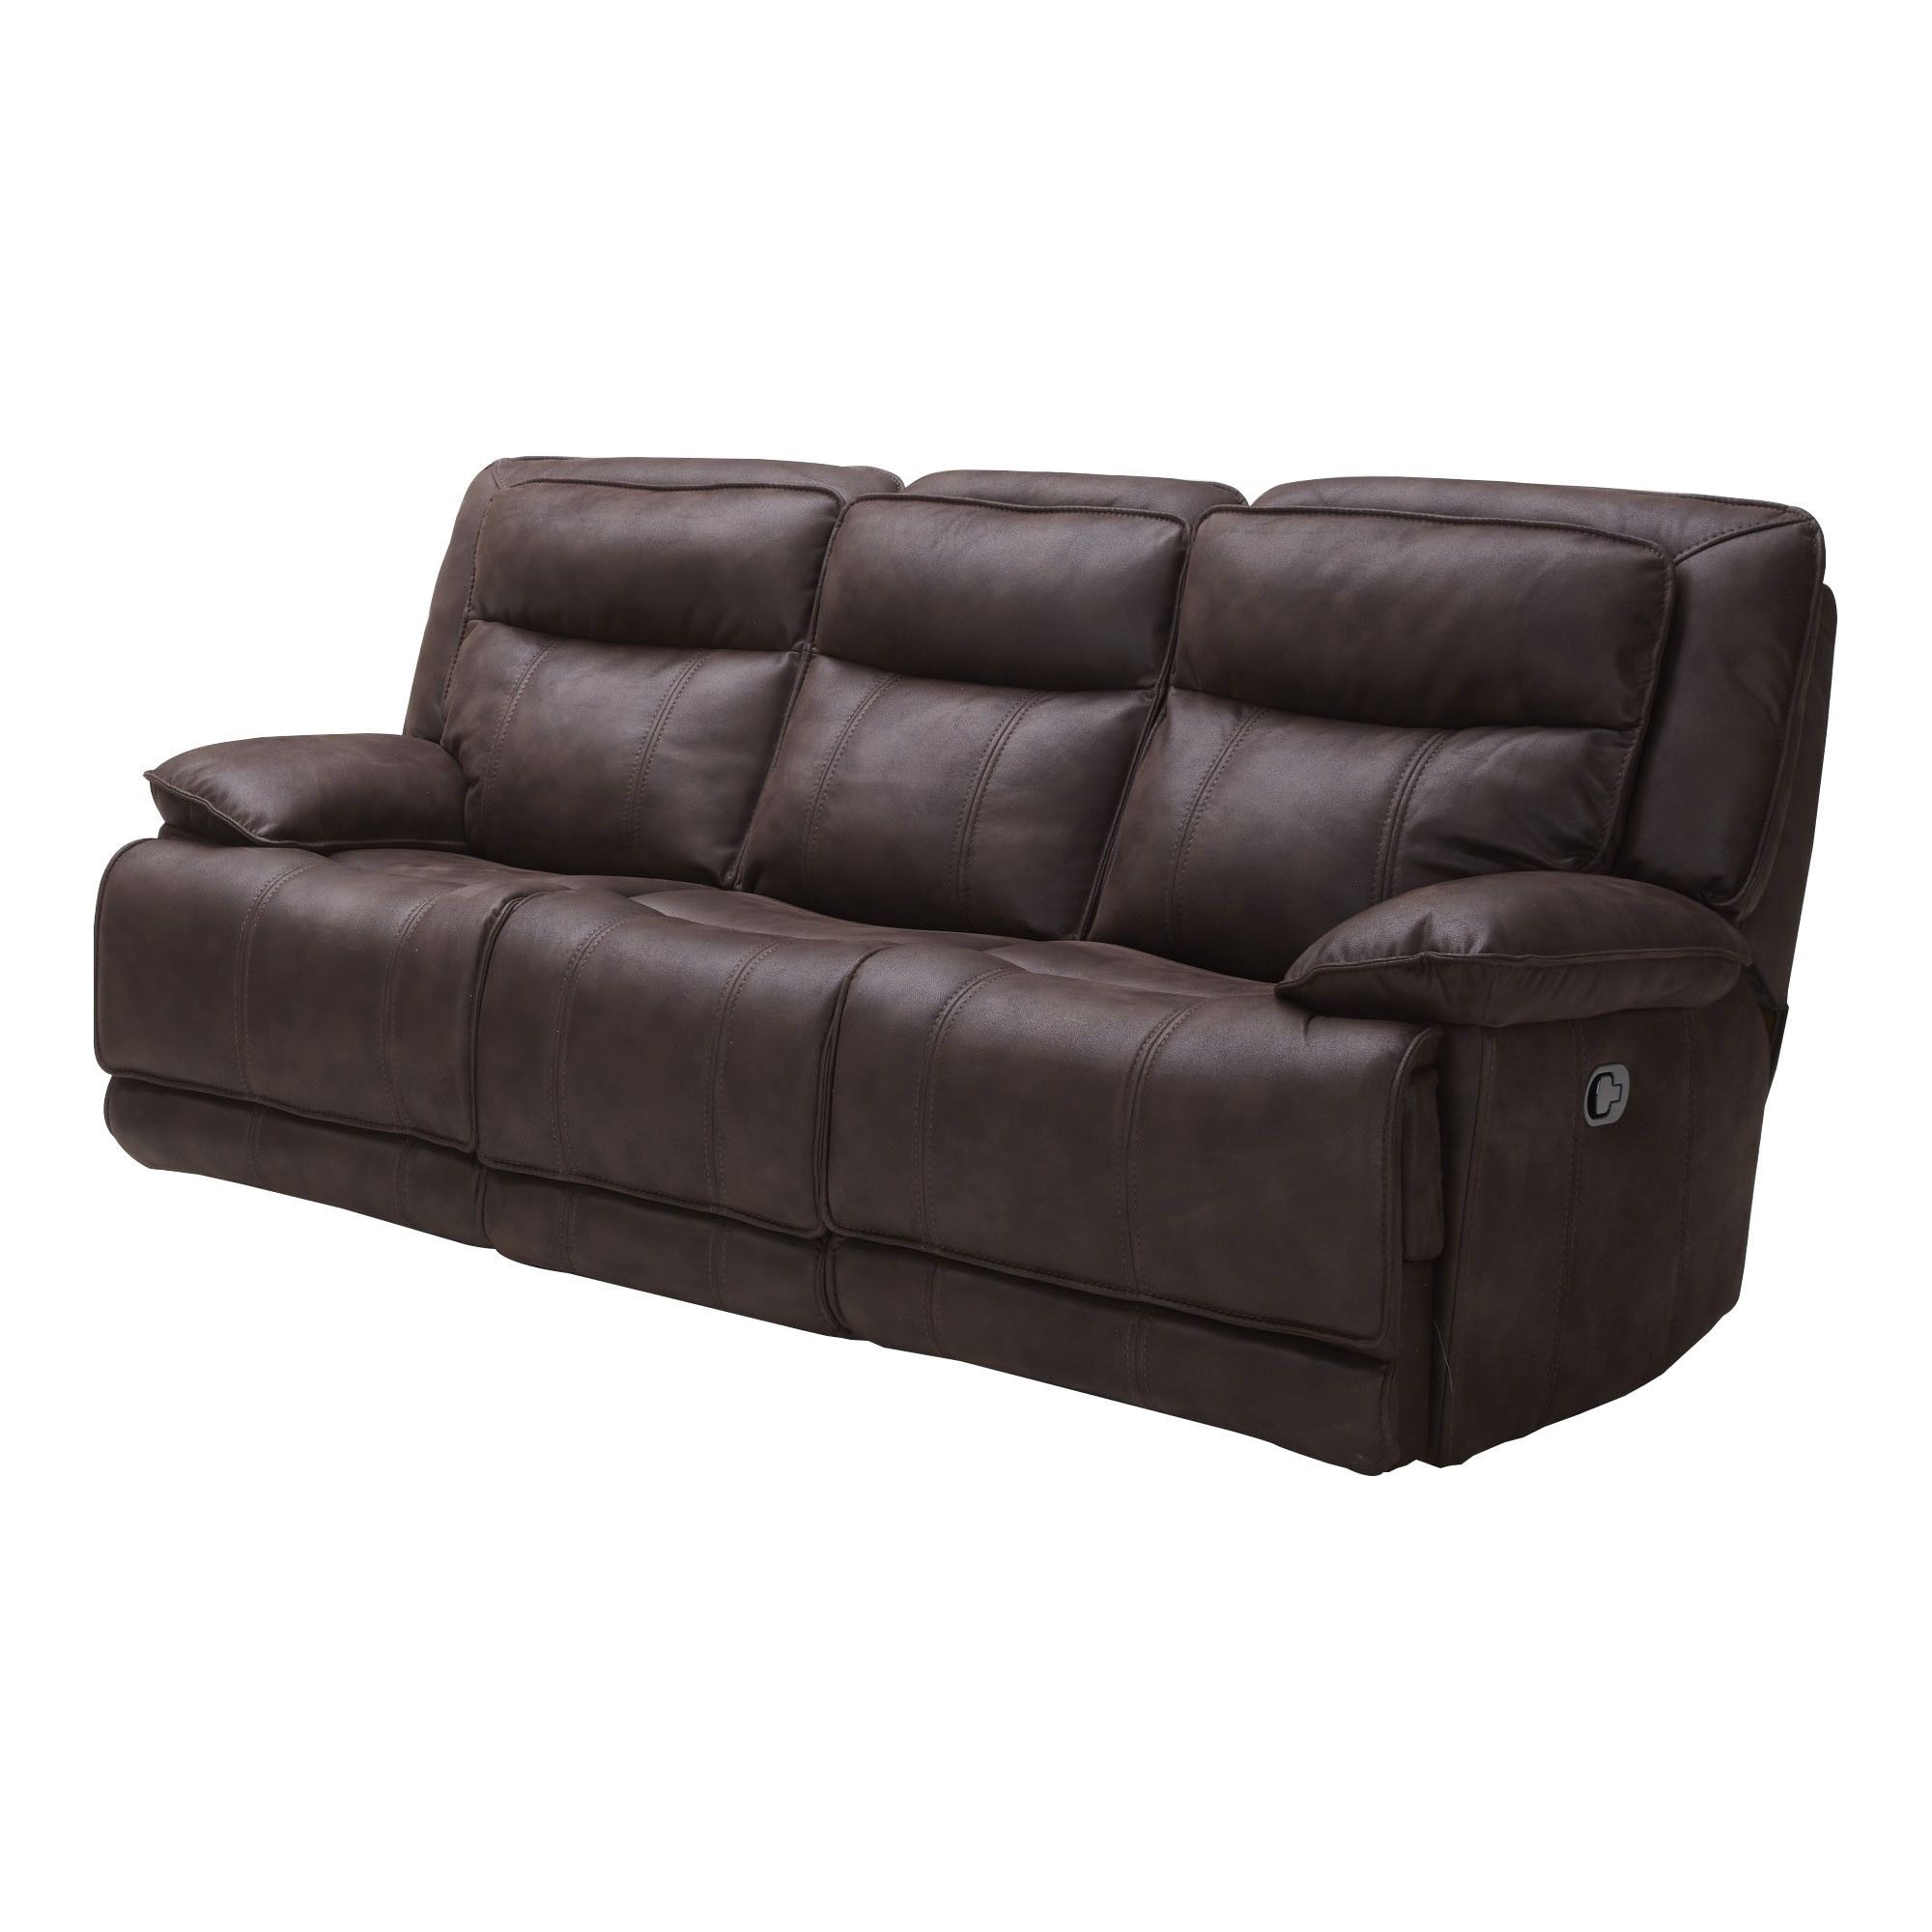 Abel Reclining Sofa  Espresso | Tepperman's Inside Teppermans Sectional Sofas (View 4 of 10)